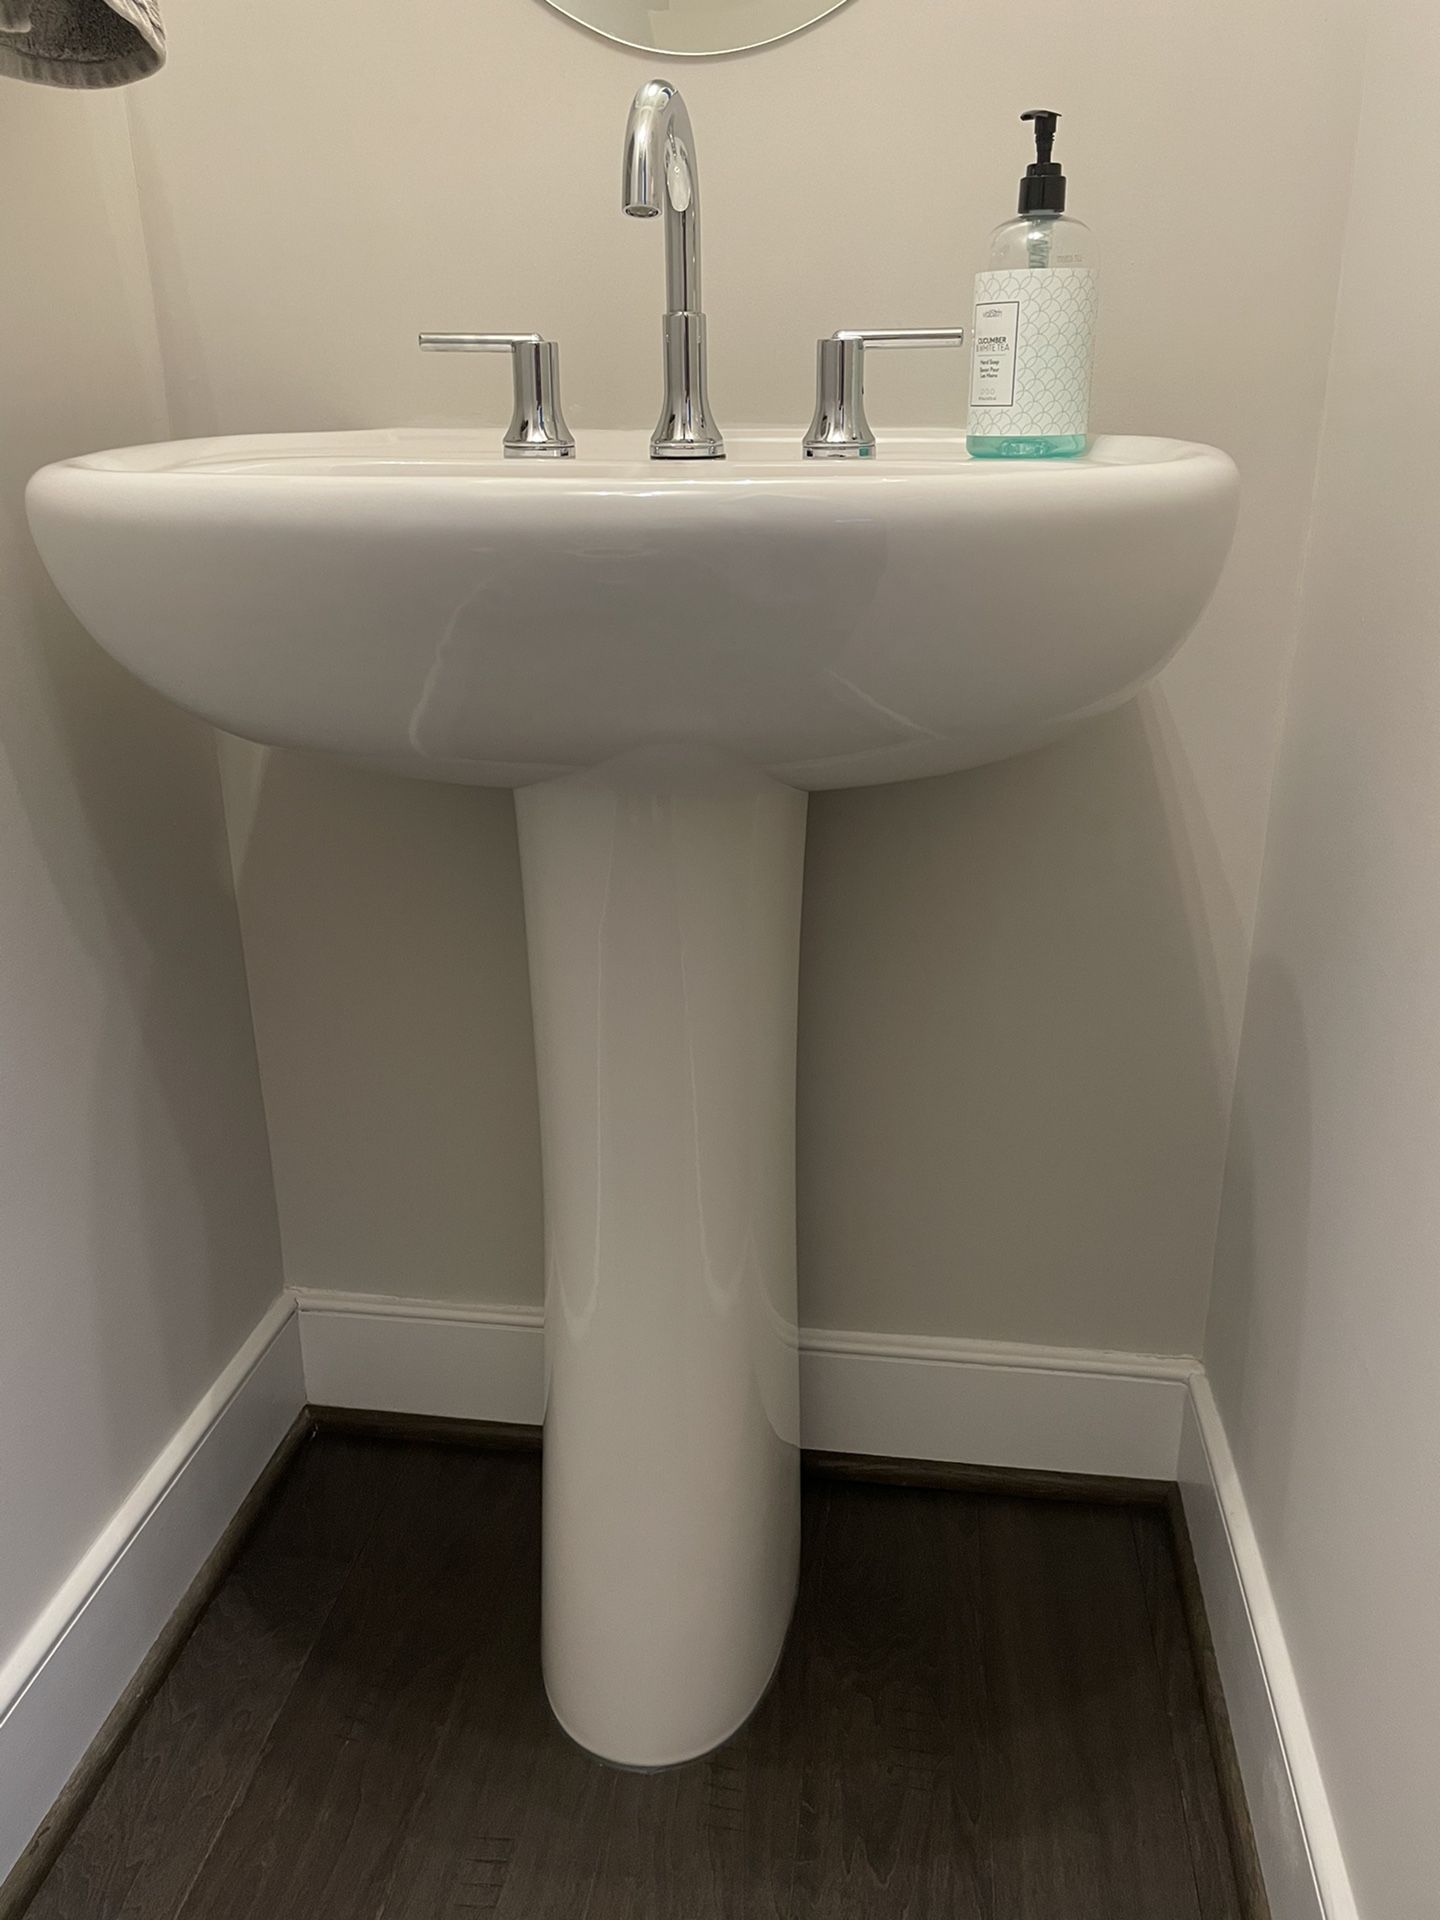 All items from a Powder Room; Sold Together Or Separately